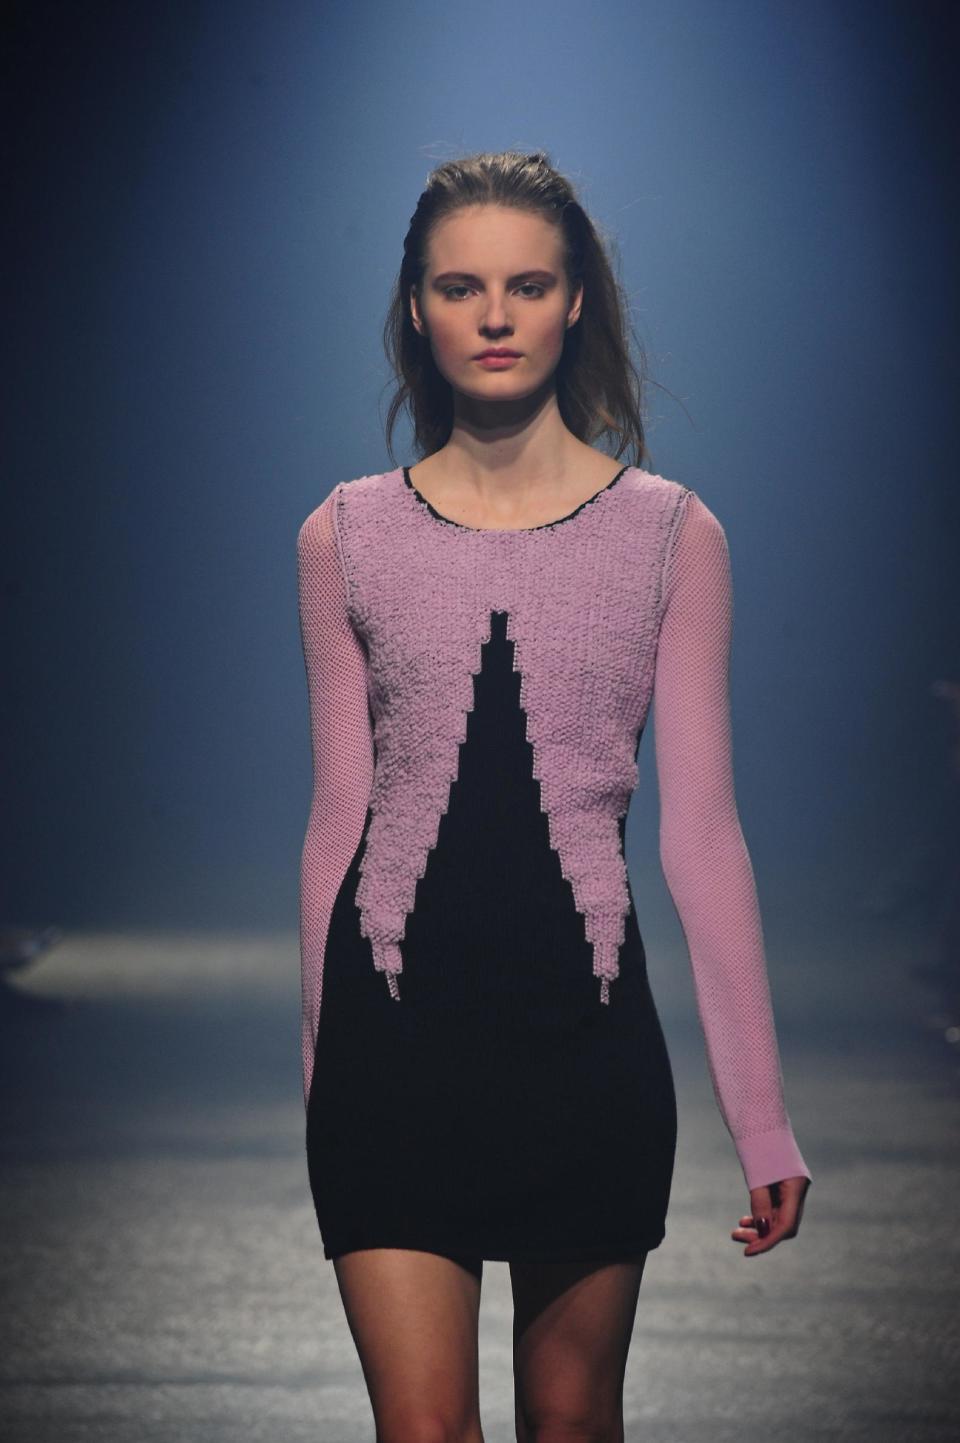 A model wears a creation by Sonia Rykiel during the presentation of her Fall/Winter 2013-2014 ready to wear collection in Paris, Friday, March 1, 2013. (AP Photo/Zacharie Scheurer)